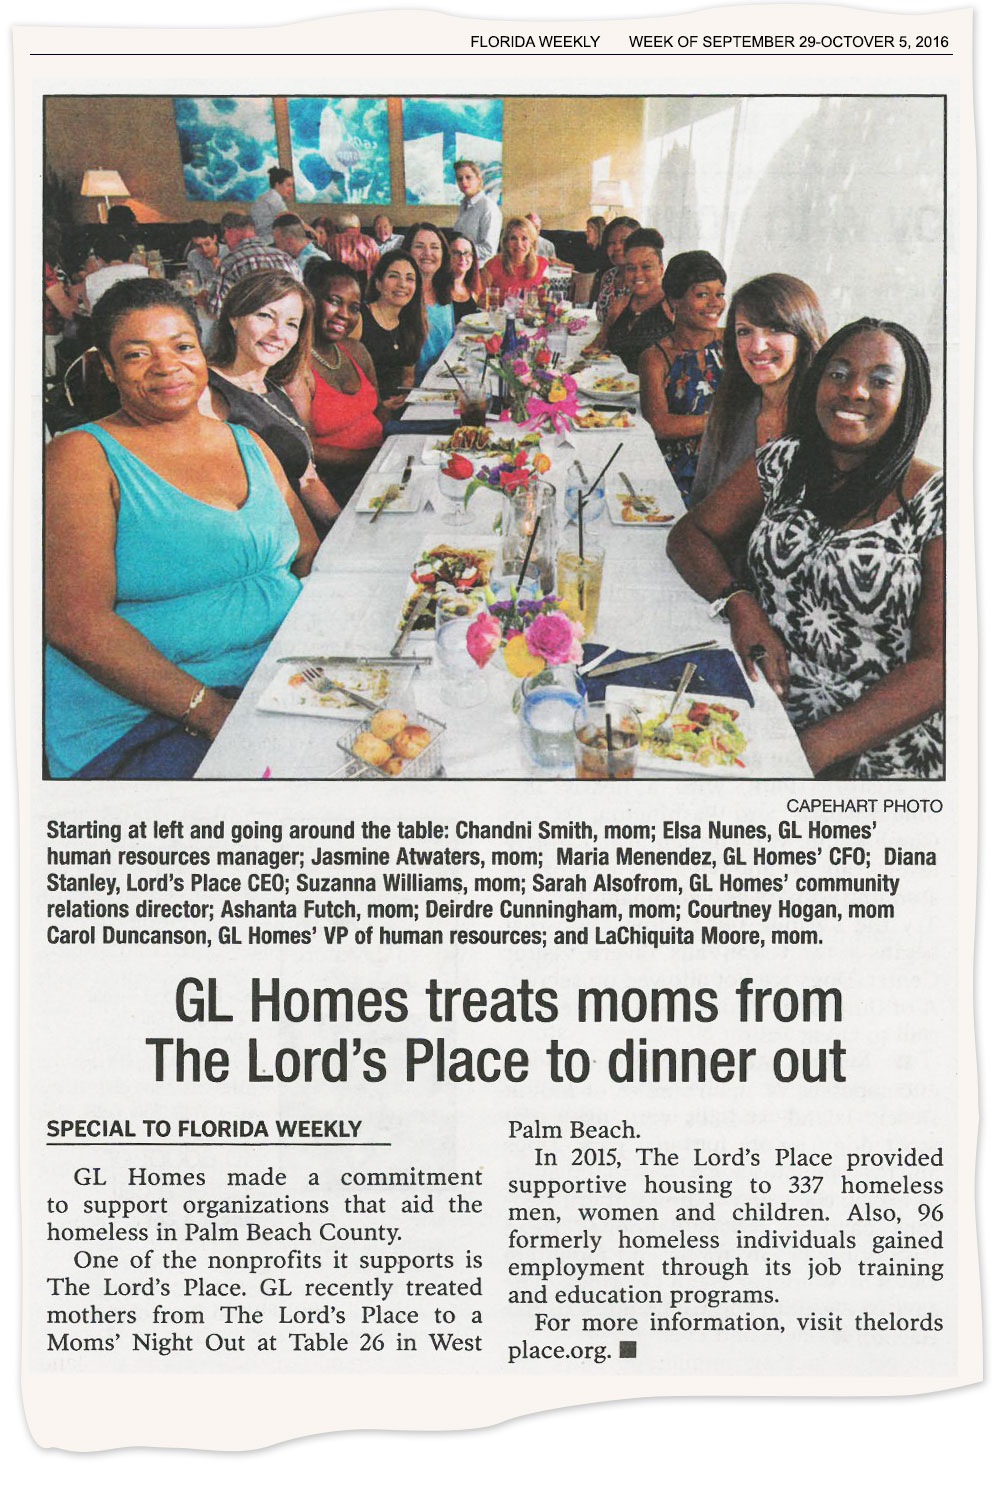 GL Homes in Florida Weekly